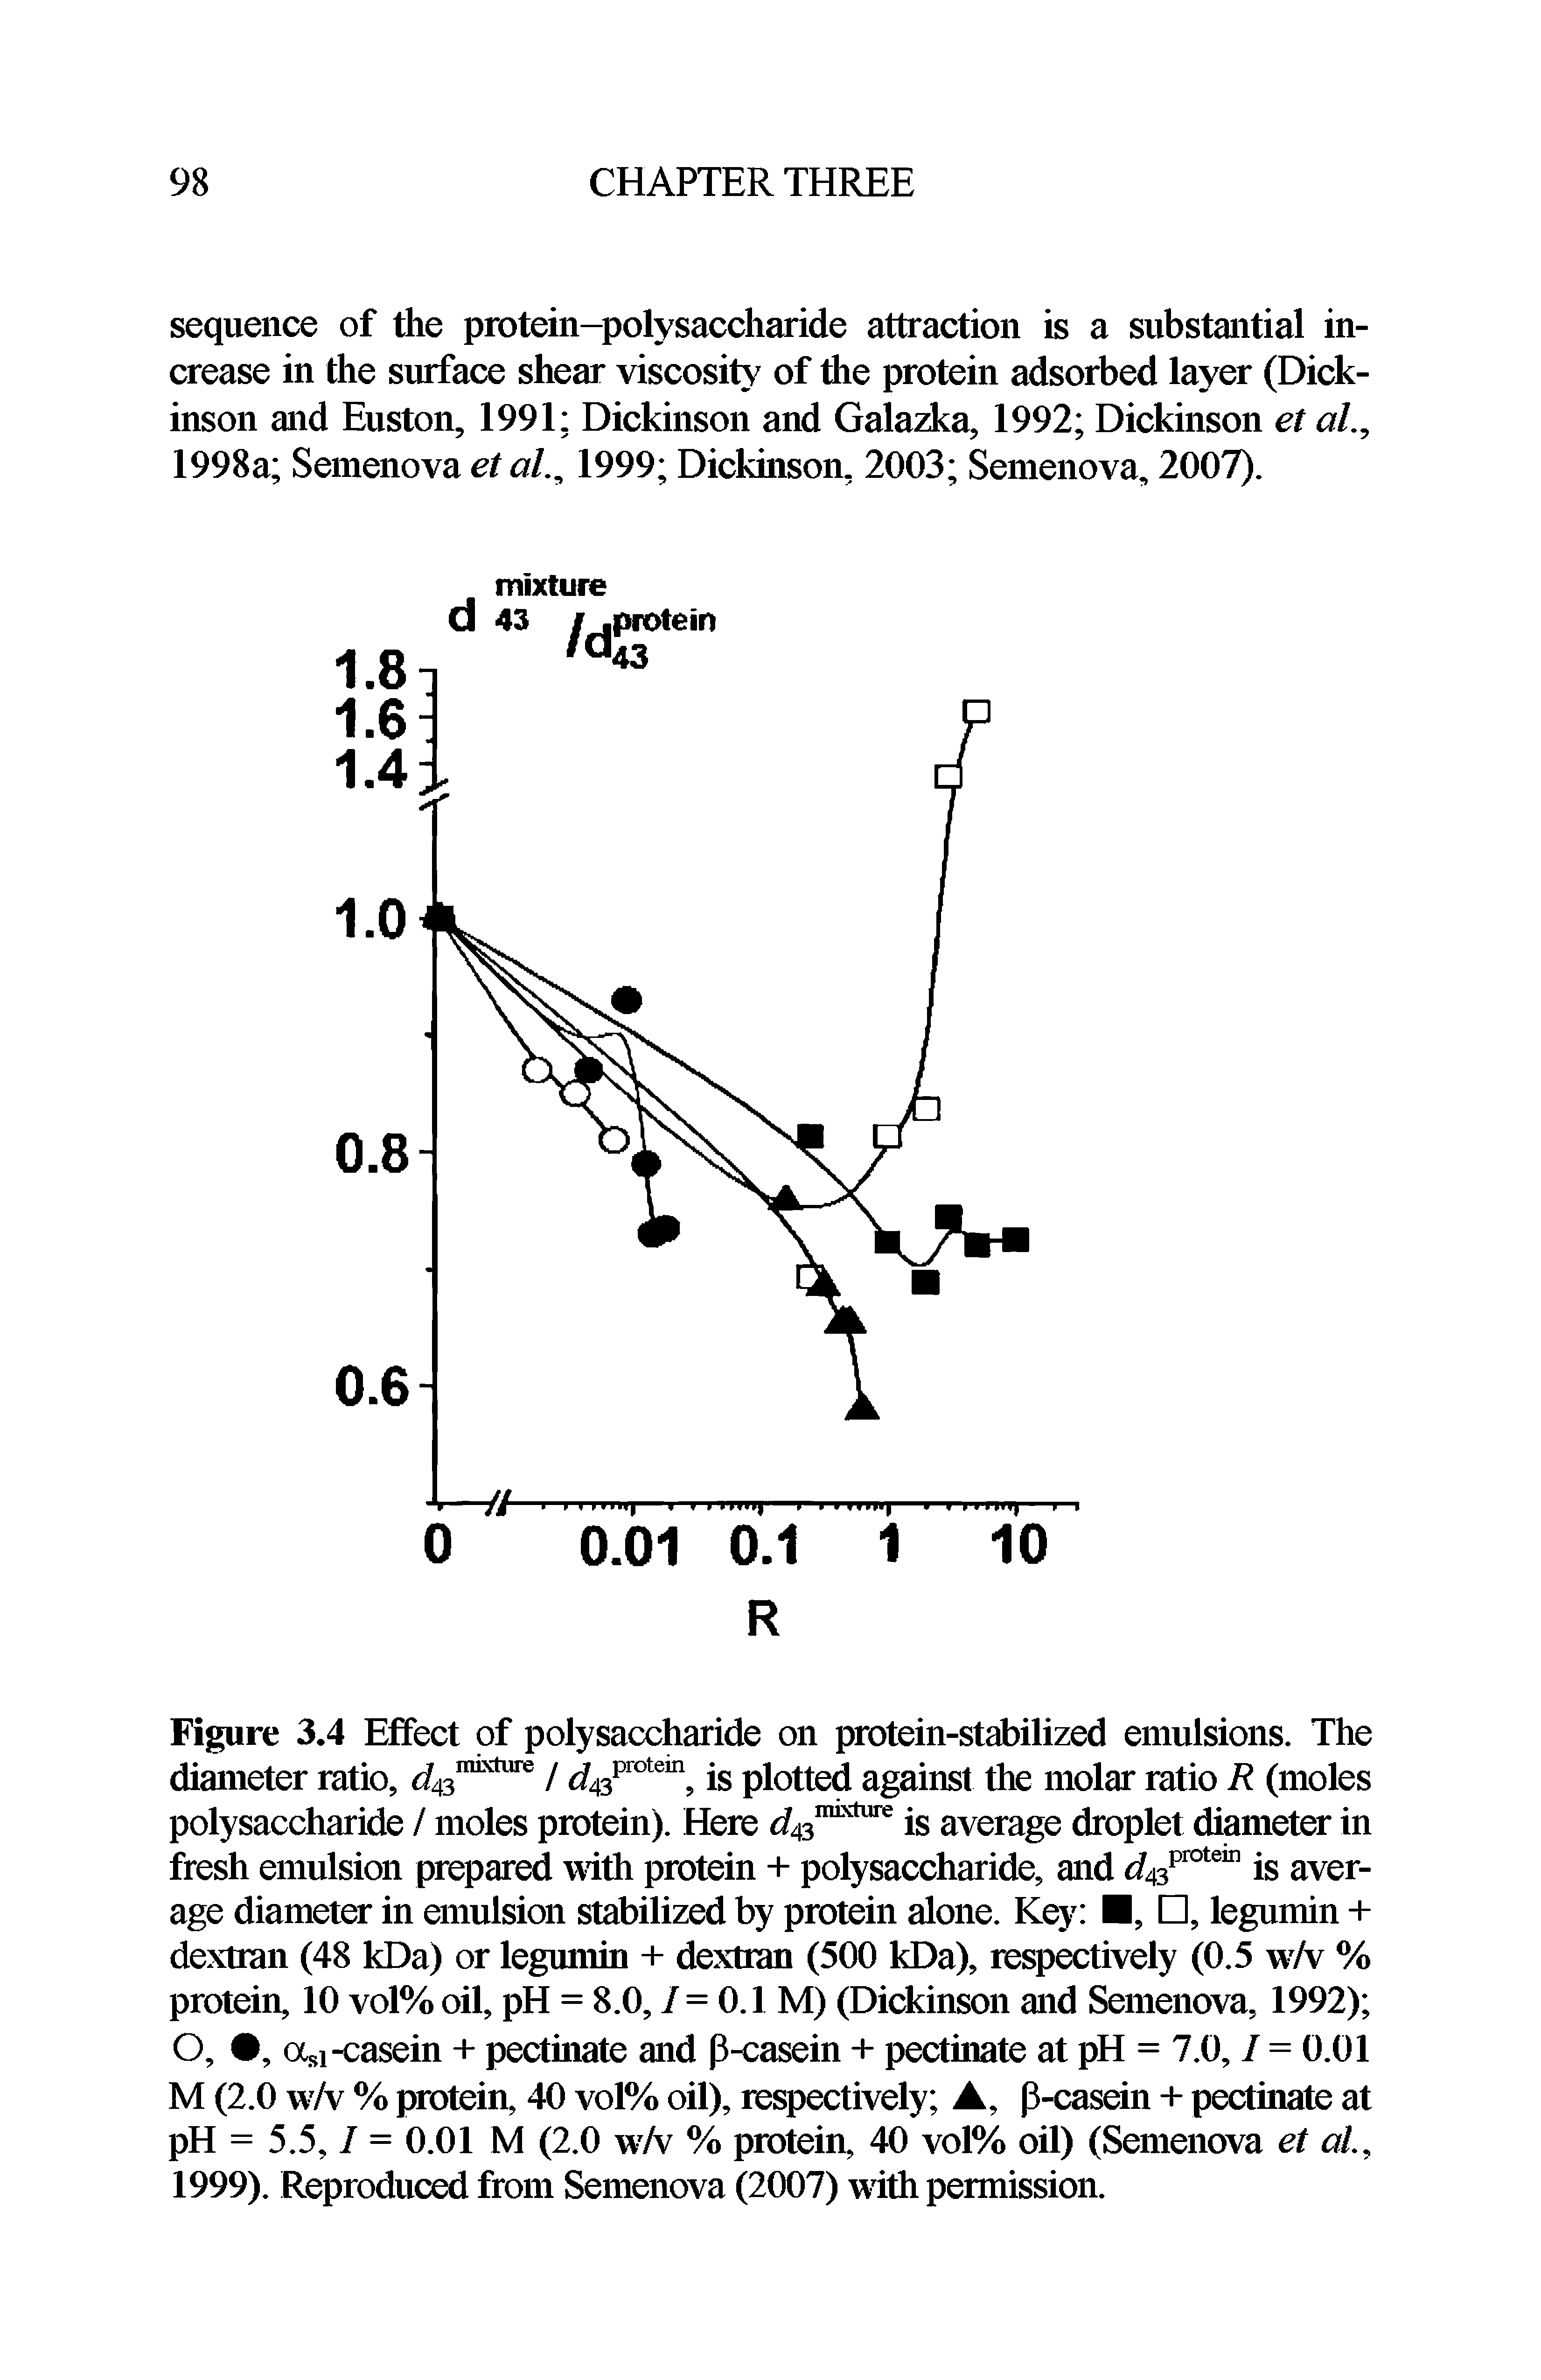 Figure 3.4 Effect of polysaccharide on protein-stabilized emulsions. The diameter ratio, j43nuxtlire / J43protem is plotted against the molar ratio R (moles polysaccharide / moles protein). Here J43nuxtlire is average droplet diameter in fresh emulsion prepared with protein + polysaccharide, and d43pTOtQm is average diameter in emulsion stabilized by protein alone. Key , , legumin + dextmn (48 kDa) or legumin + dextran (500 kDa), respectively (0.5 w/v % protein, 10 vol% oil, pH = 8.0, /= 0.1 M) (Dickinson and Semenova, 1992) O, , asi-casein + pectinate and p-casein + pectinate at pH = 7.0, / = 0.01 M (2.0 w/v % protein, 40 vol% oil), respectively , p-casein + pectinate at pH = 5.5, / = 0.01 M (2.0 w/v % protein, 40 vol% oil) (Semenova et al, 1999). Reproduced from Semenova (2007) with permission.